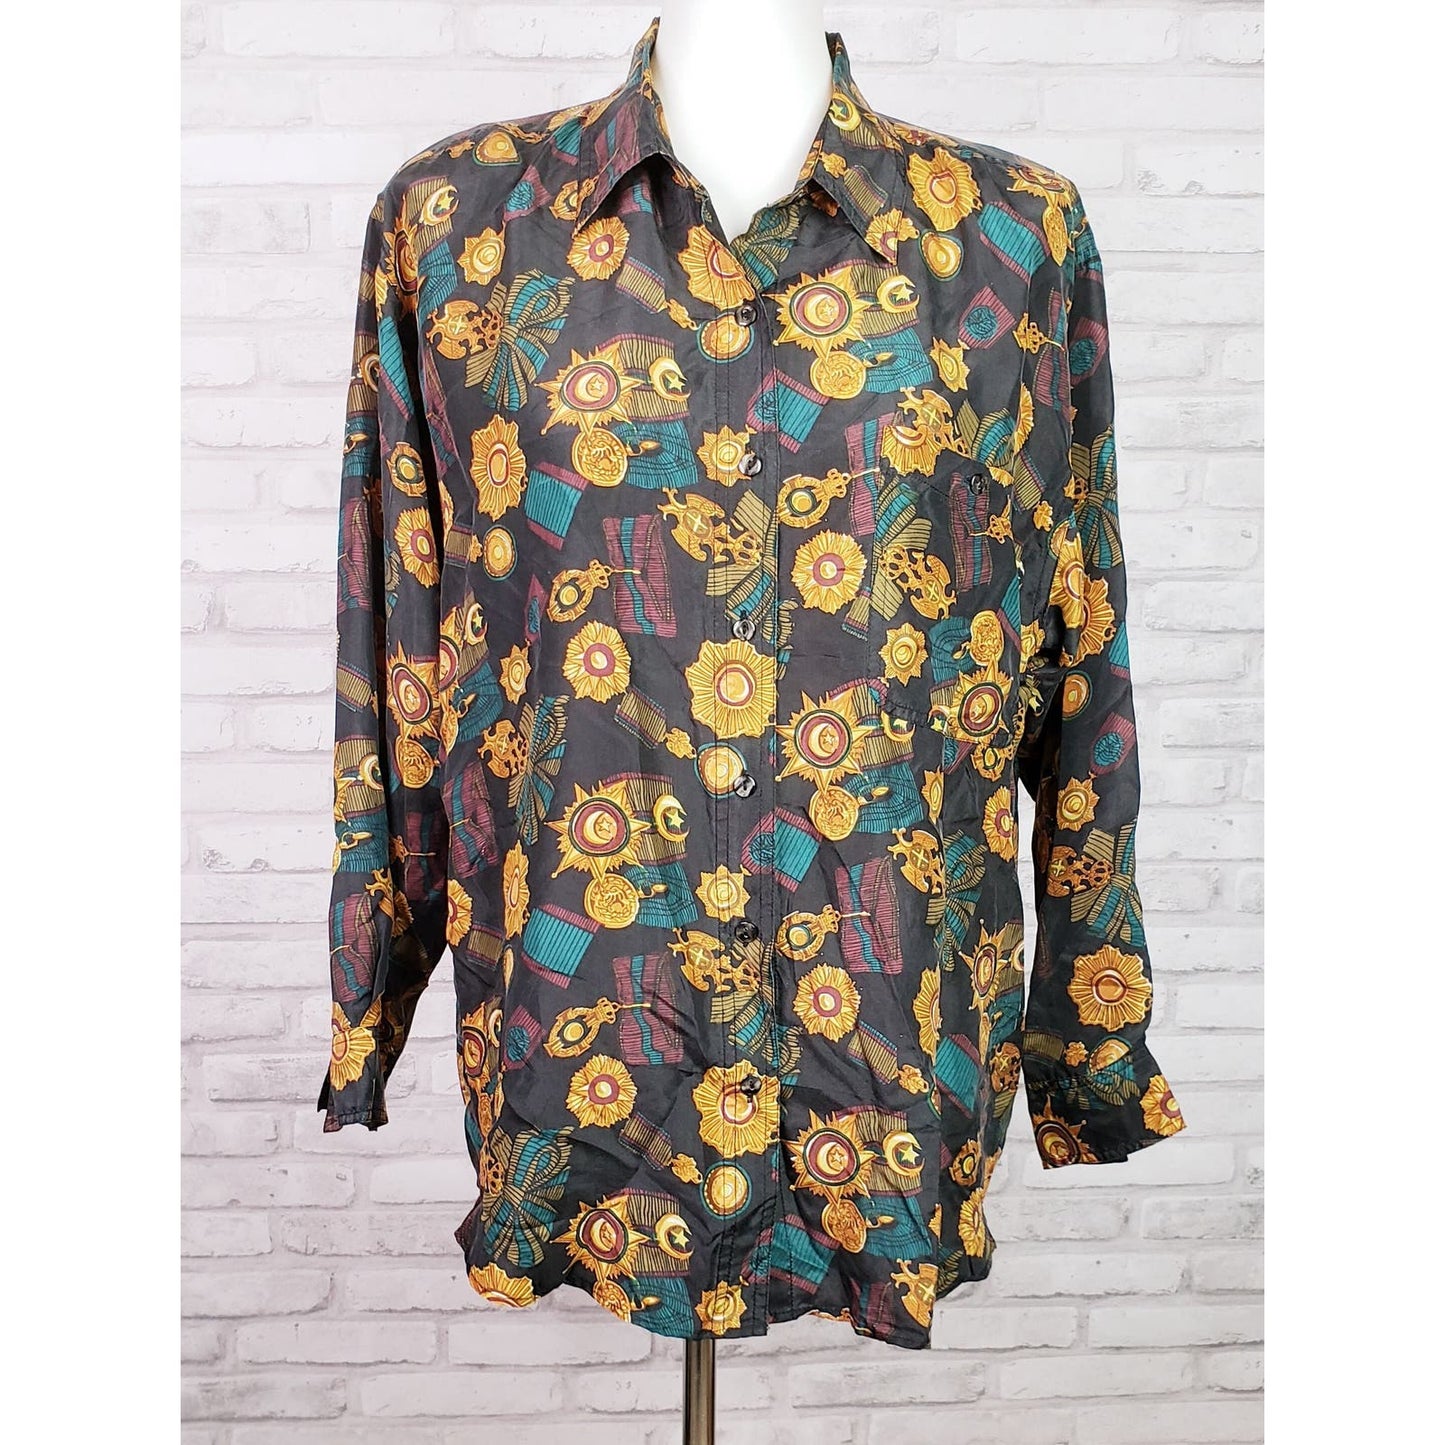 80s blouse size Medium baroque medals and ribbons silk print, vintage navy blue loose fit button front womens shirt